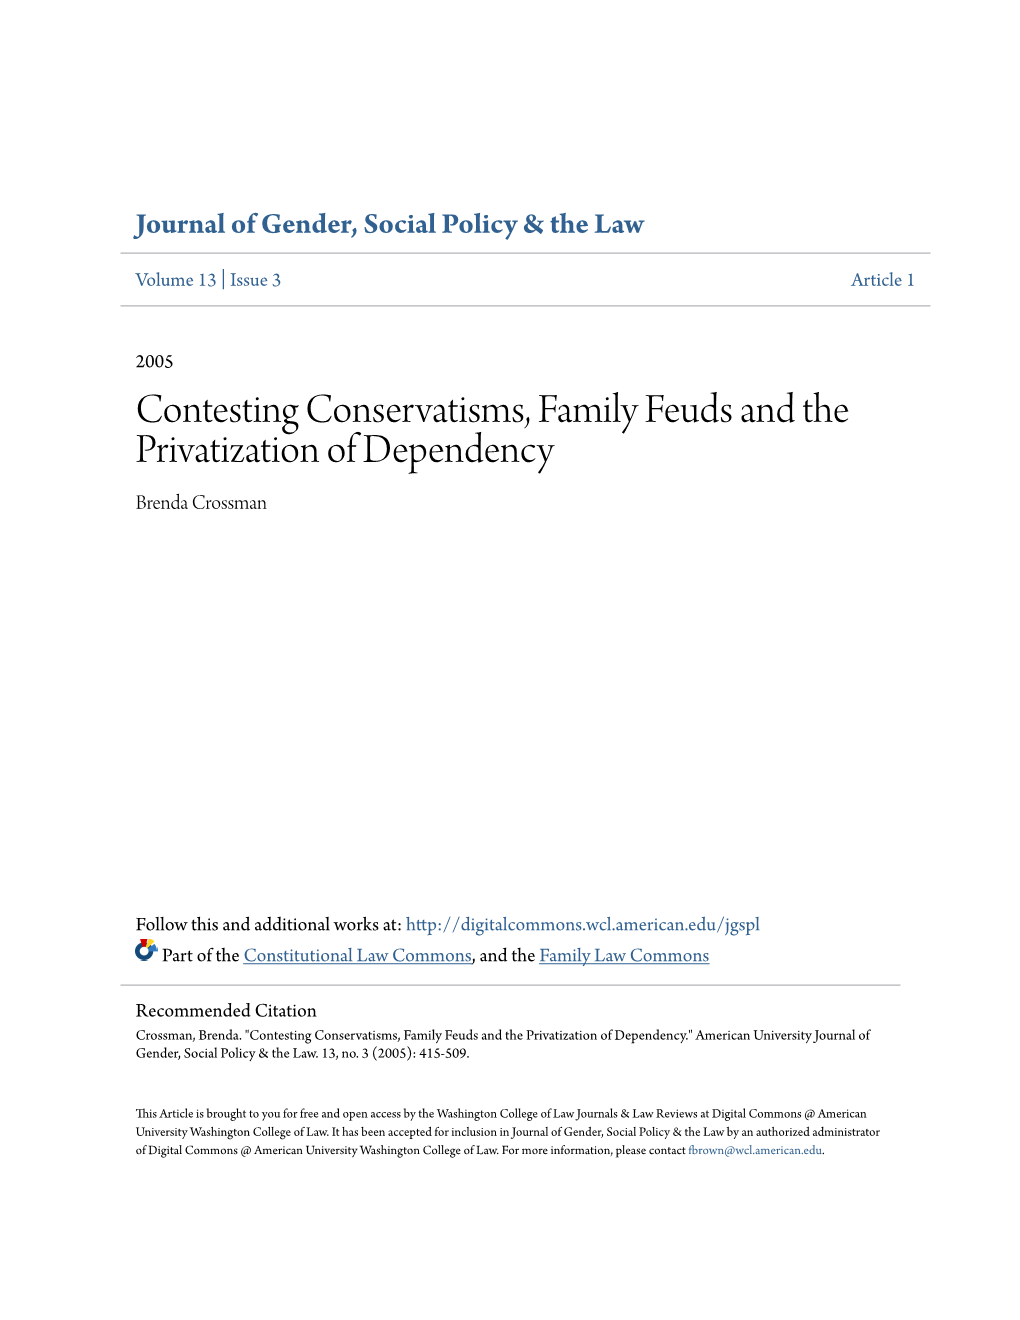 Contesting Conservatisms, Family Feuds and the Privatization of Dependency Brenda Crossman